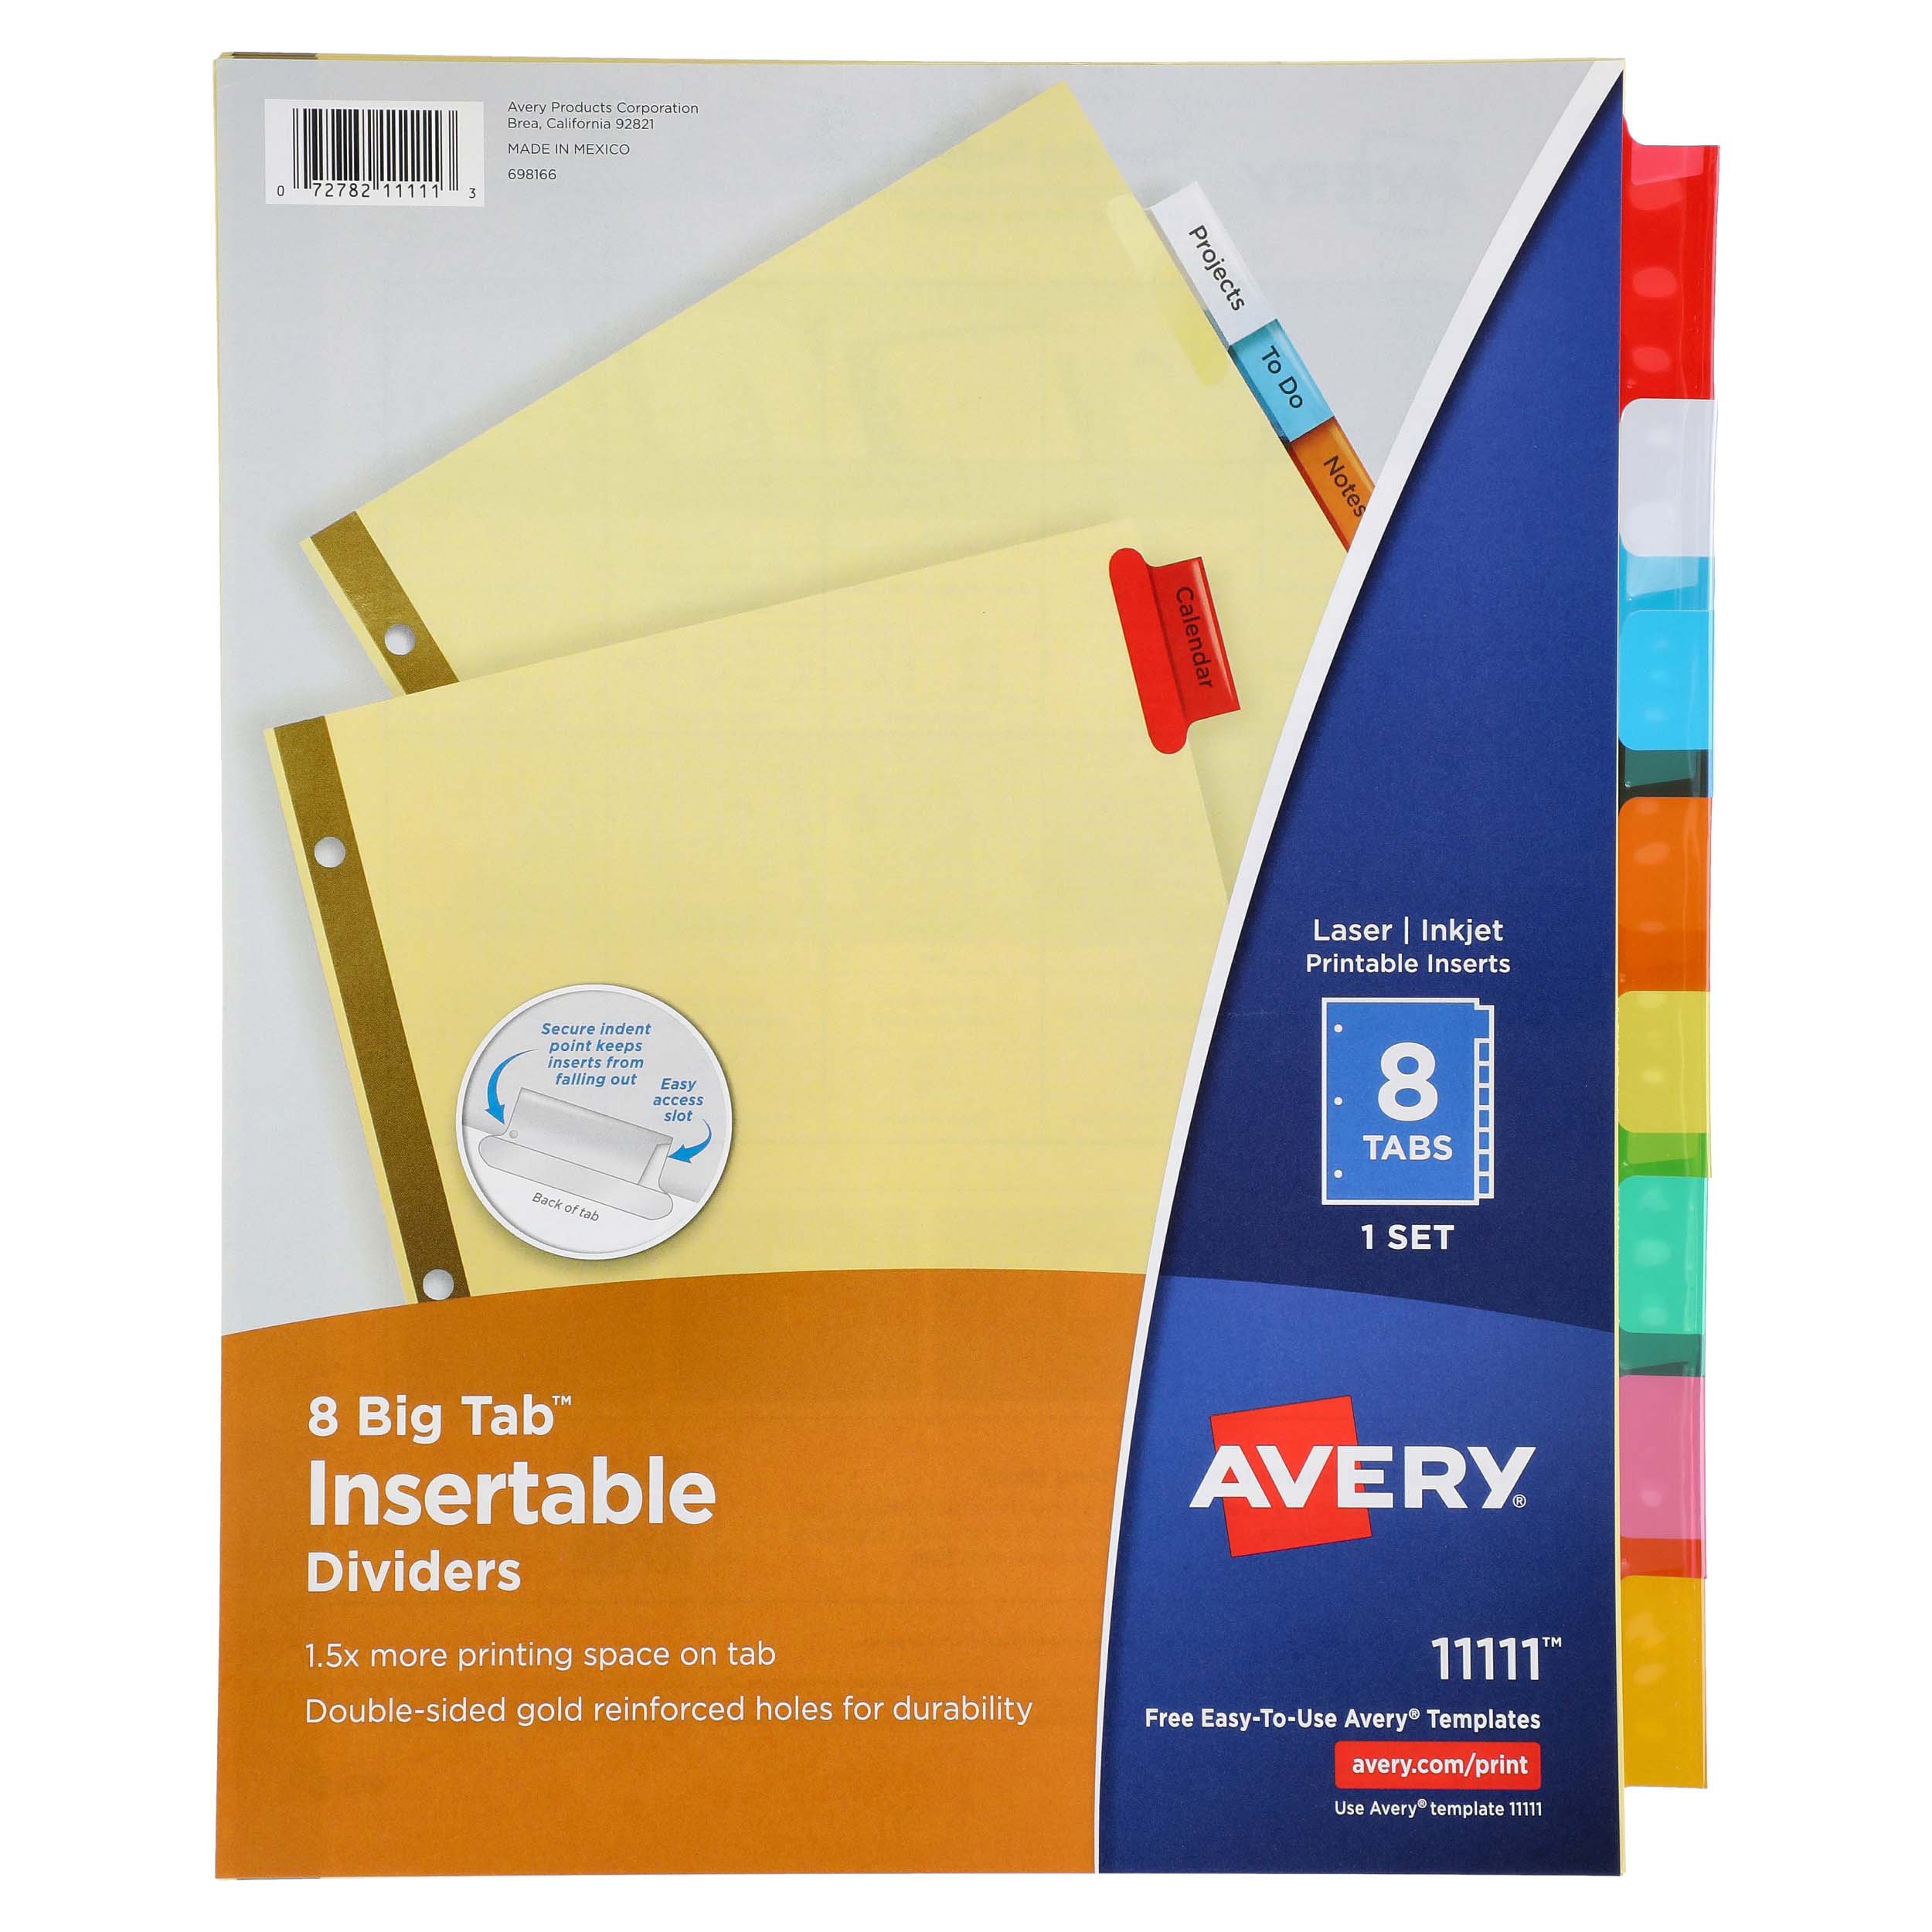 avery-big-tab-insertable-dividers-multicolor-tabs-shop-dividers